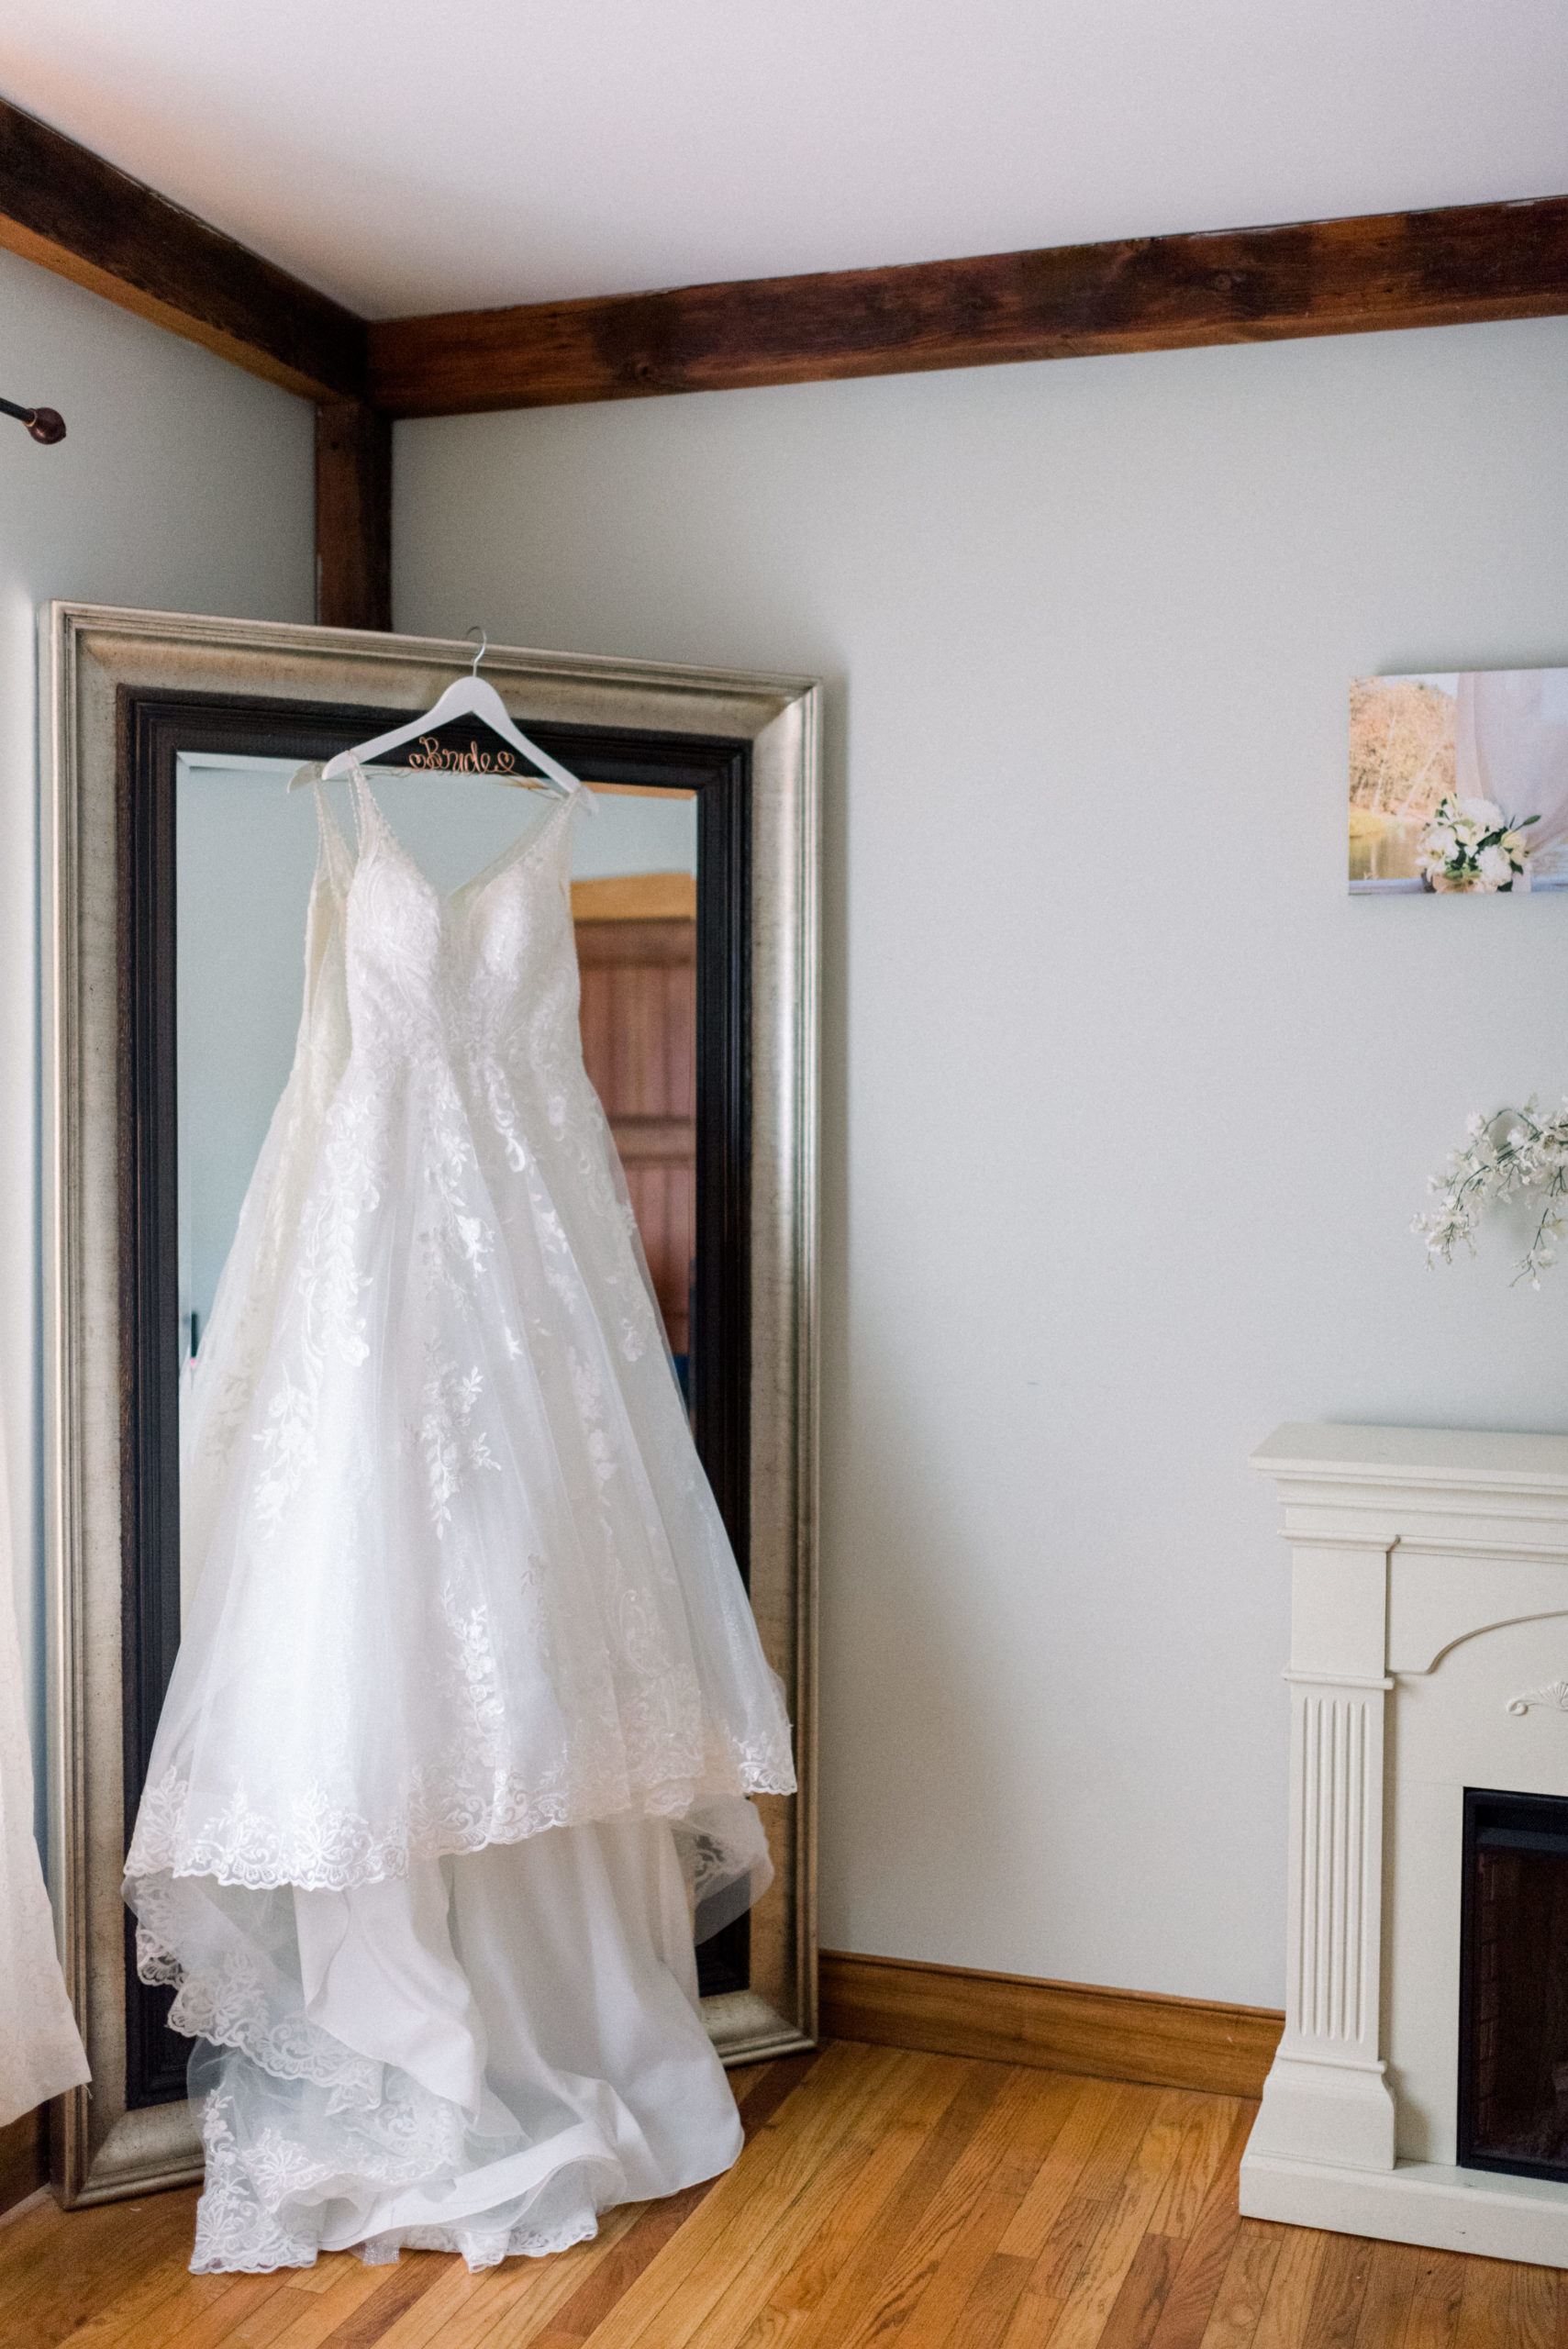 wedding dress hanging from mirror before stunning lodges at gettysburg wedding ceremony